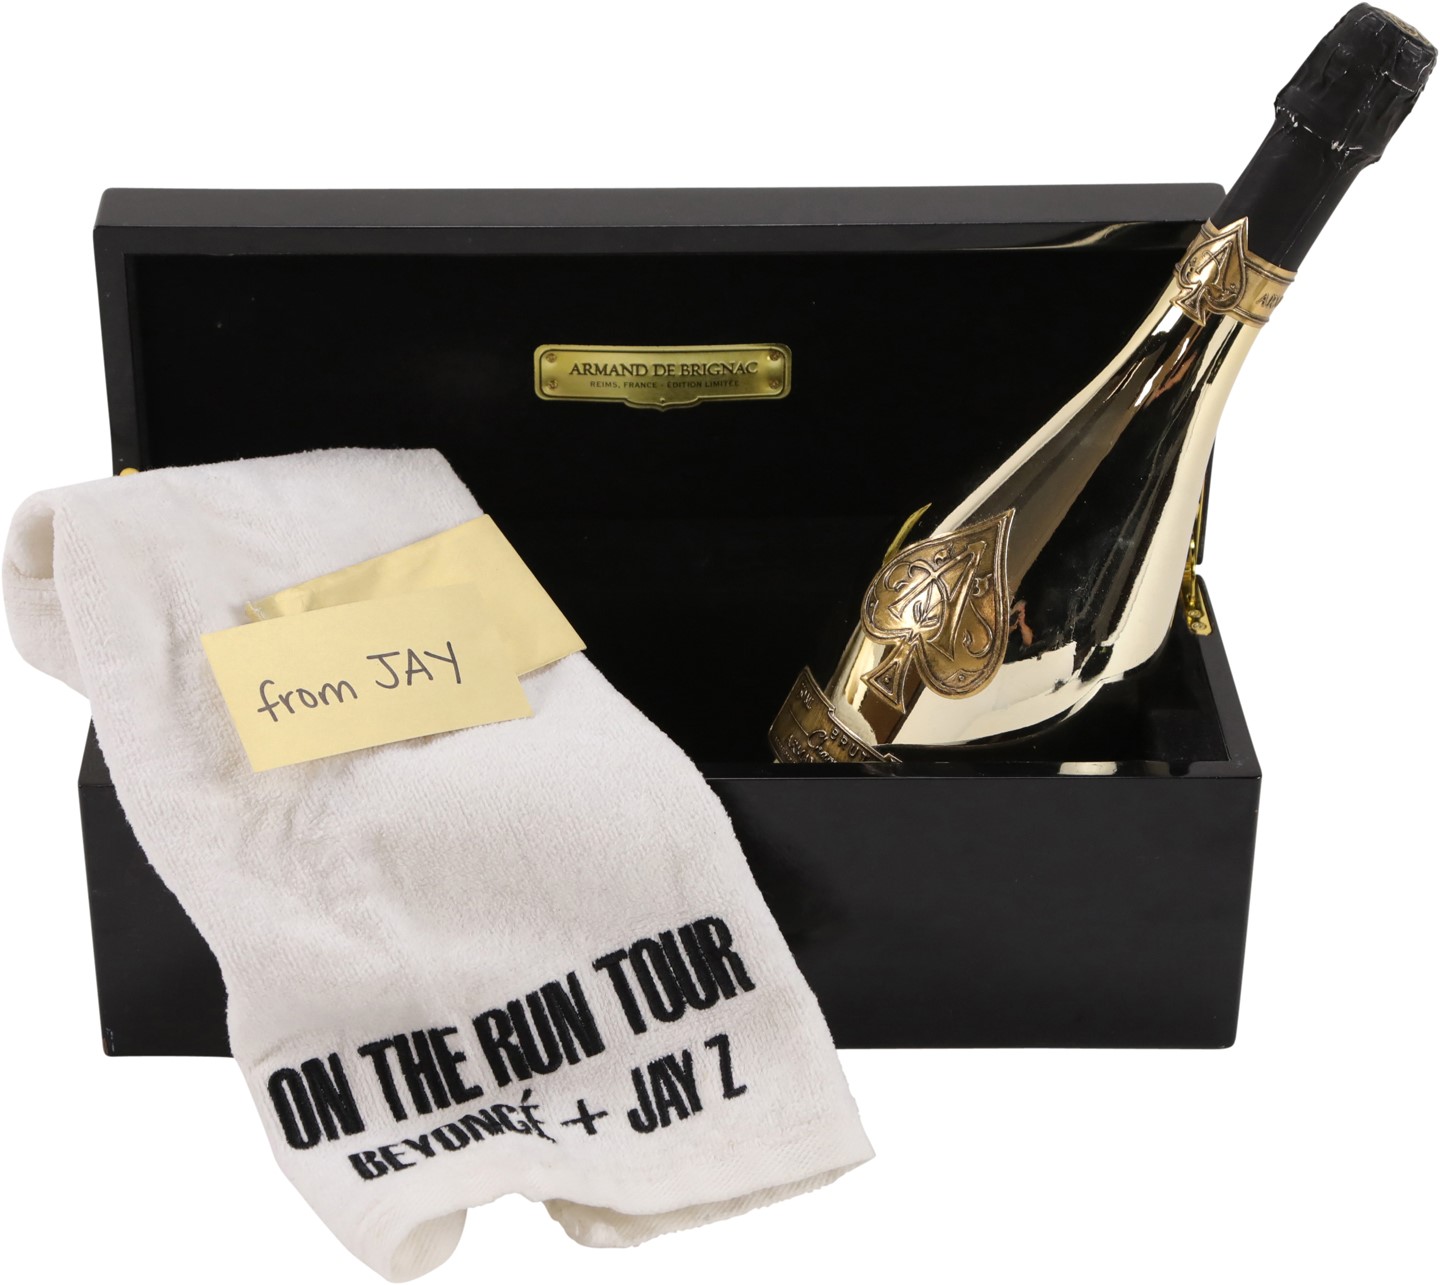 Rock And Pop Culture - Jay-Z Personally Gifted Ace of Spades Champagne Bottle w/On the Run Tour Used Towels (Jay-Z Security Guard Provenance)